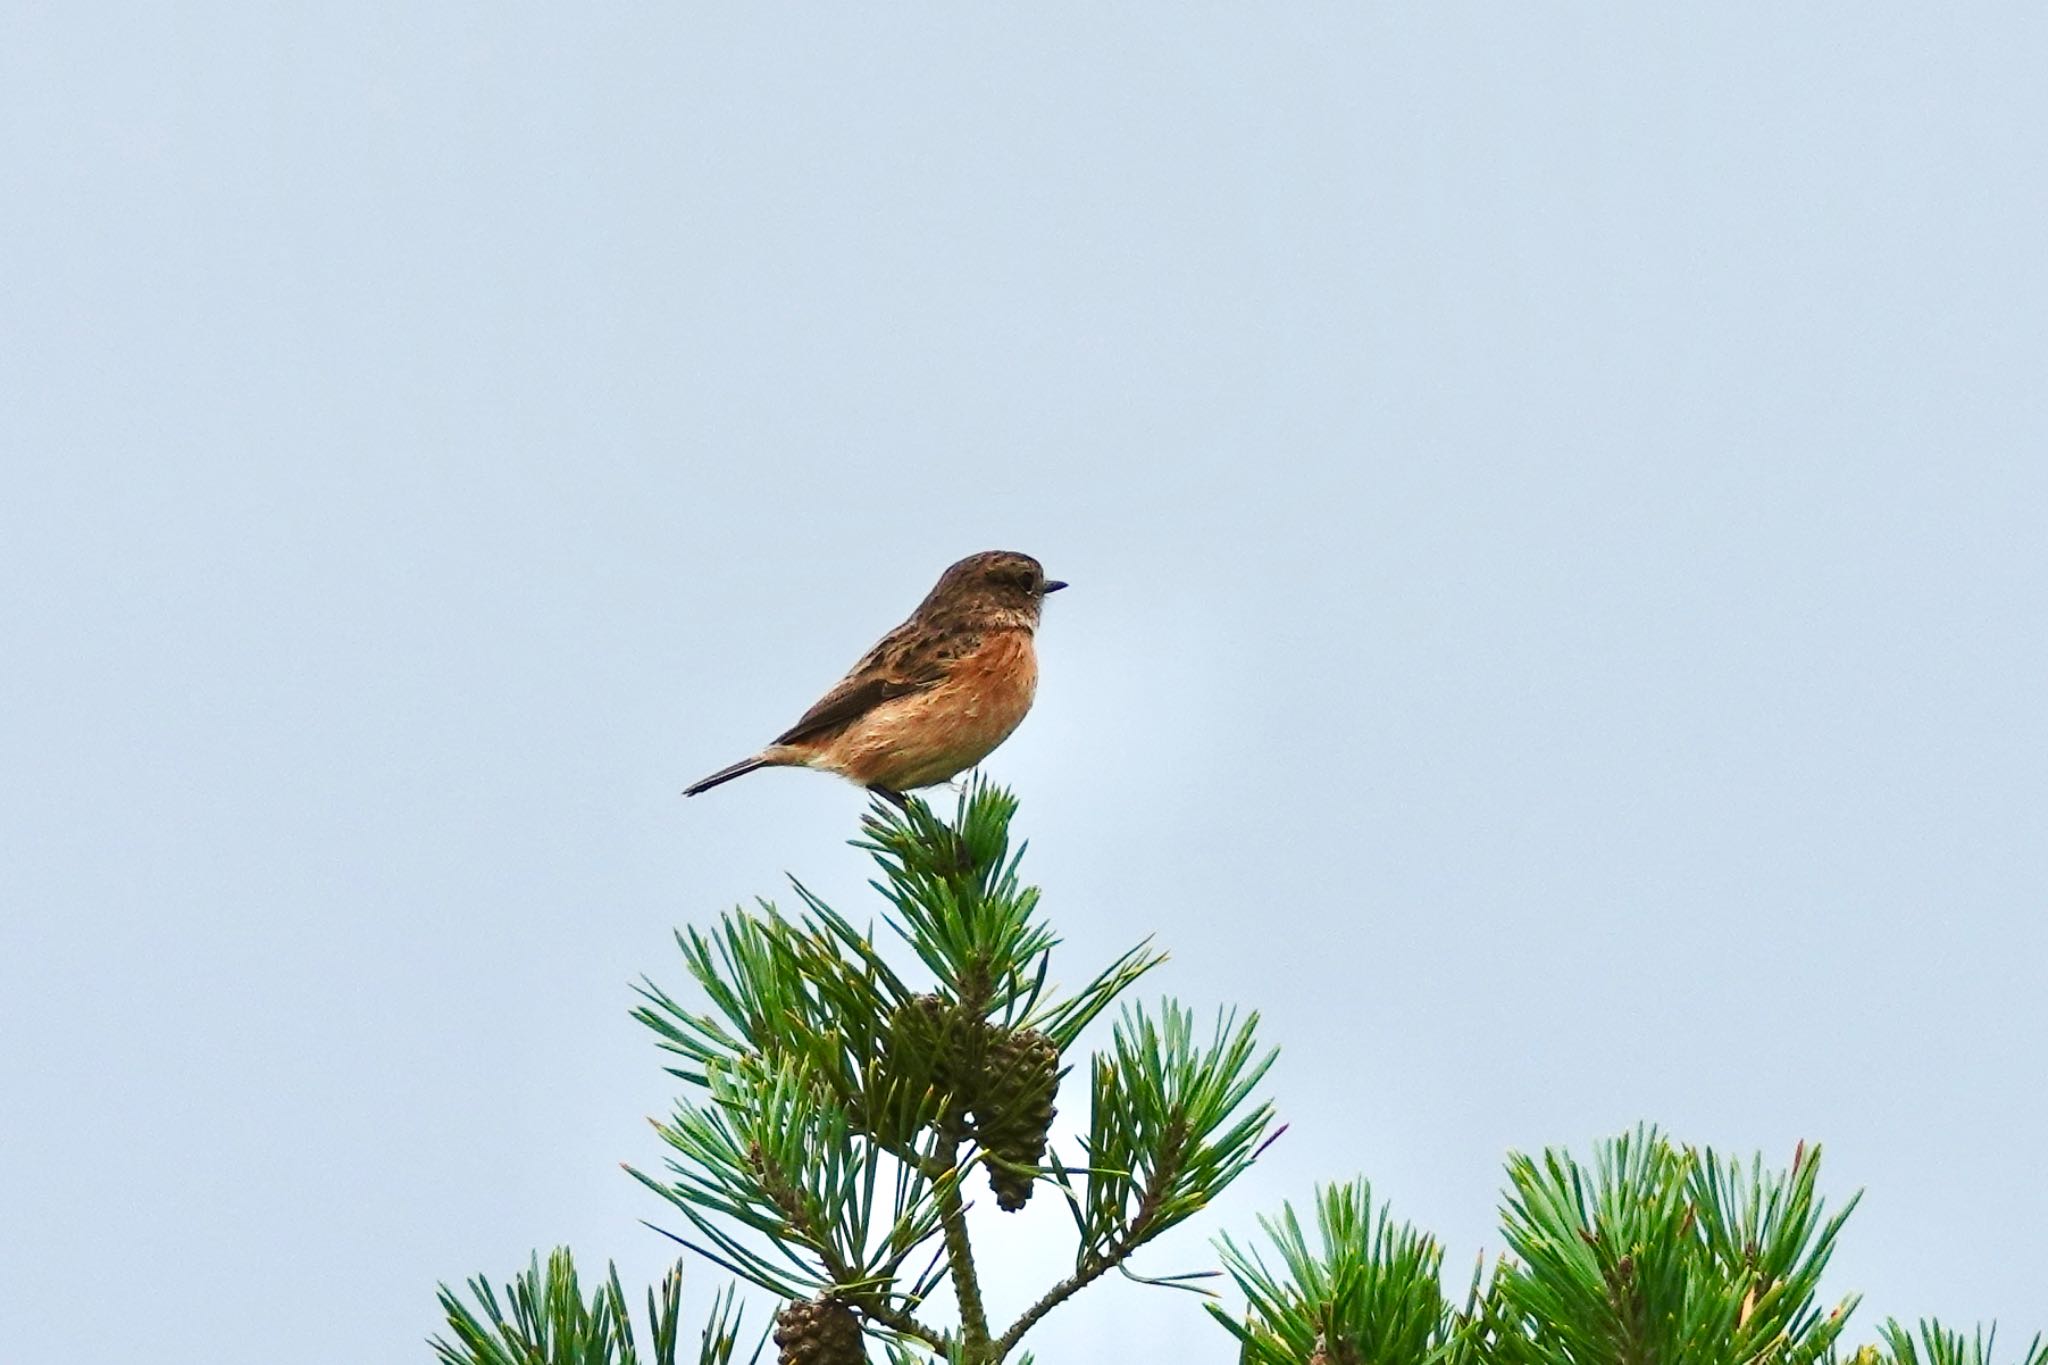 Photo of European Stonechat at La Rochelle by のどか